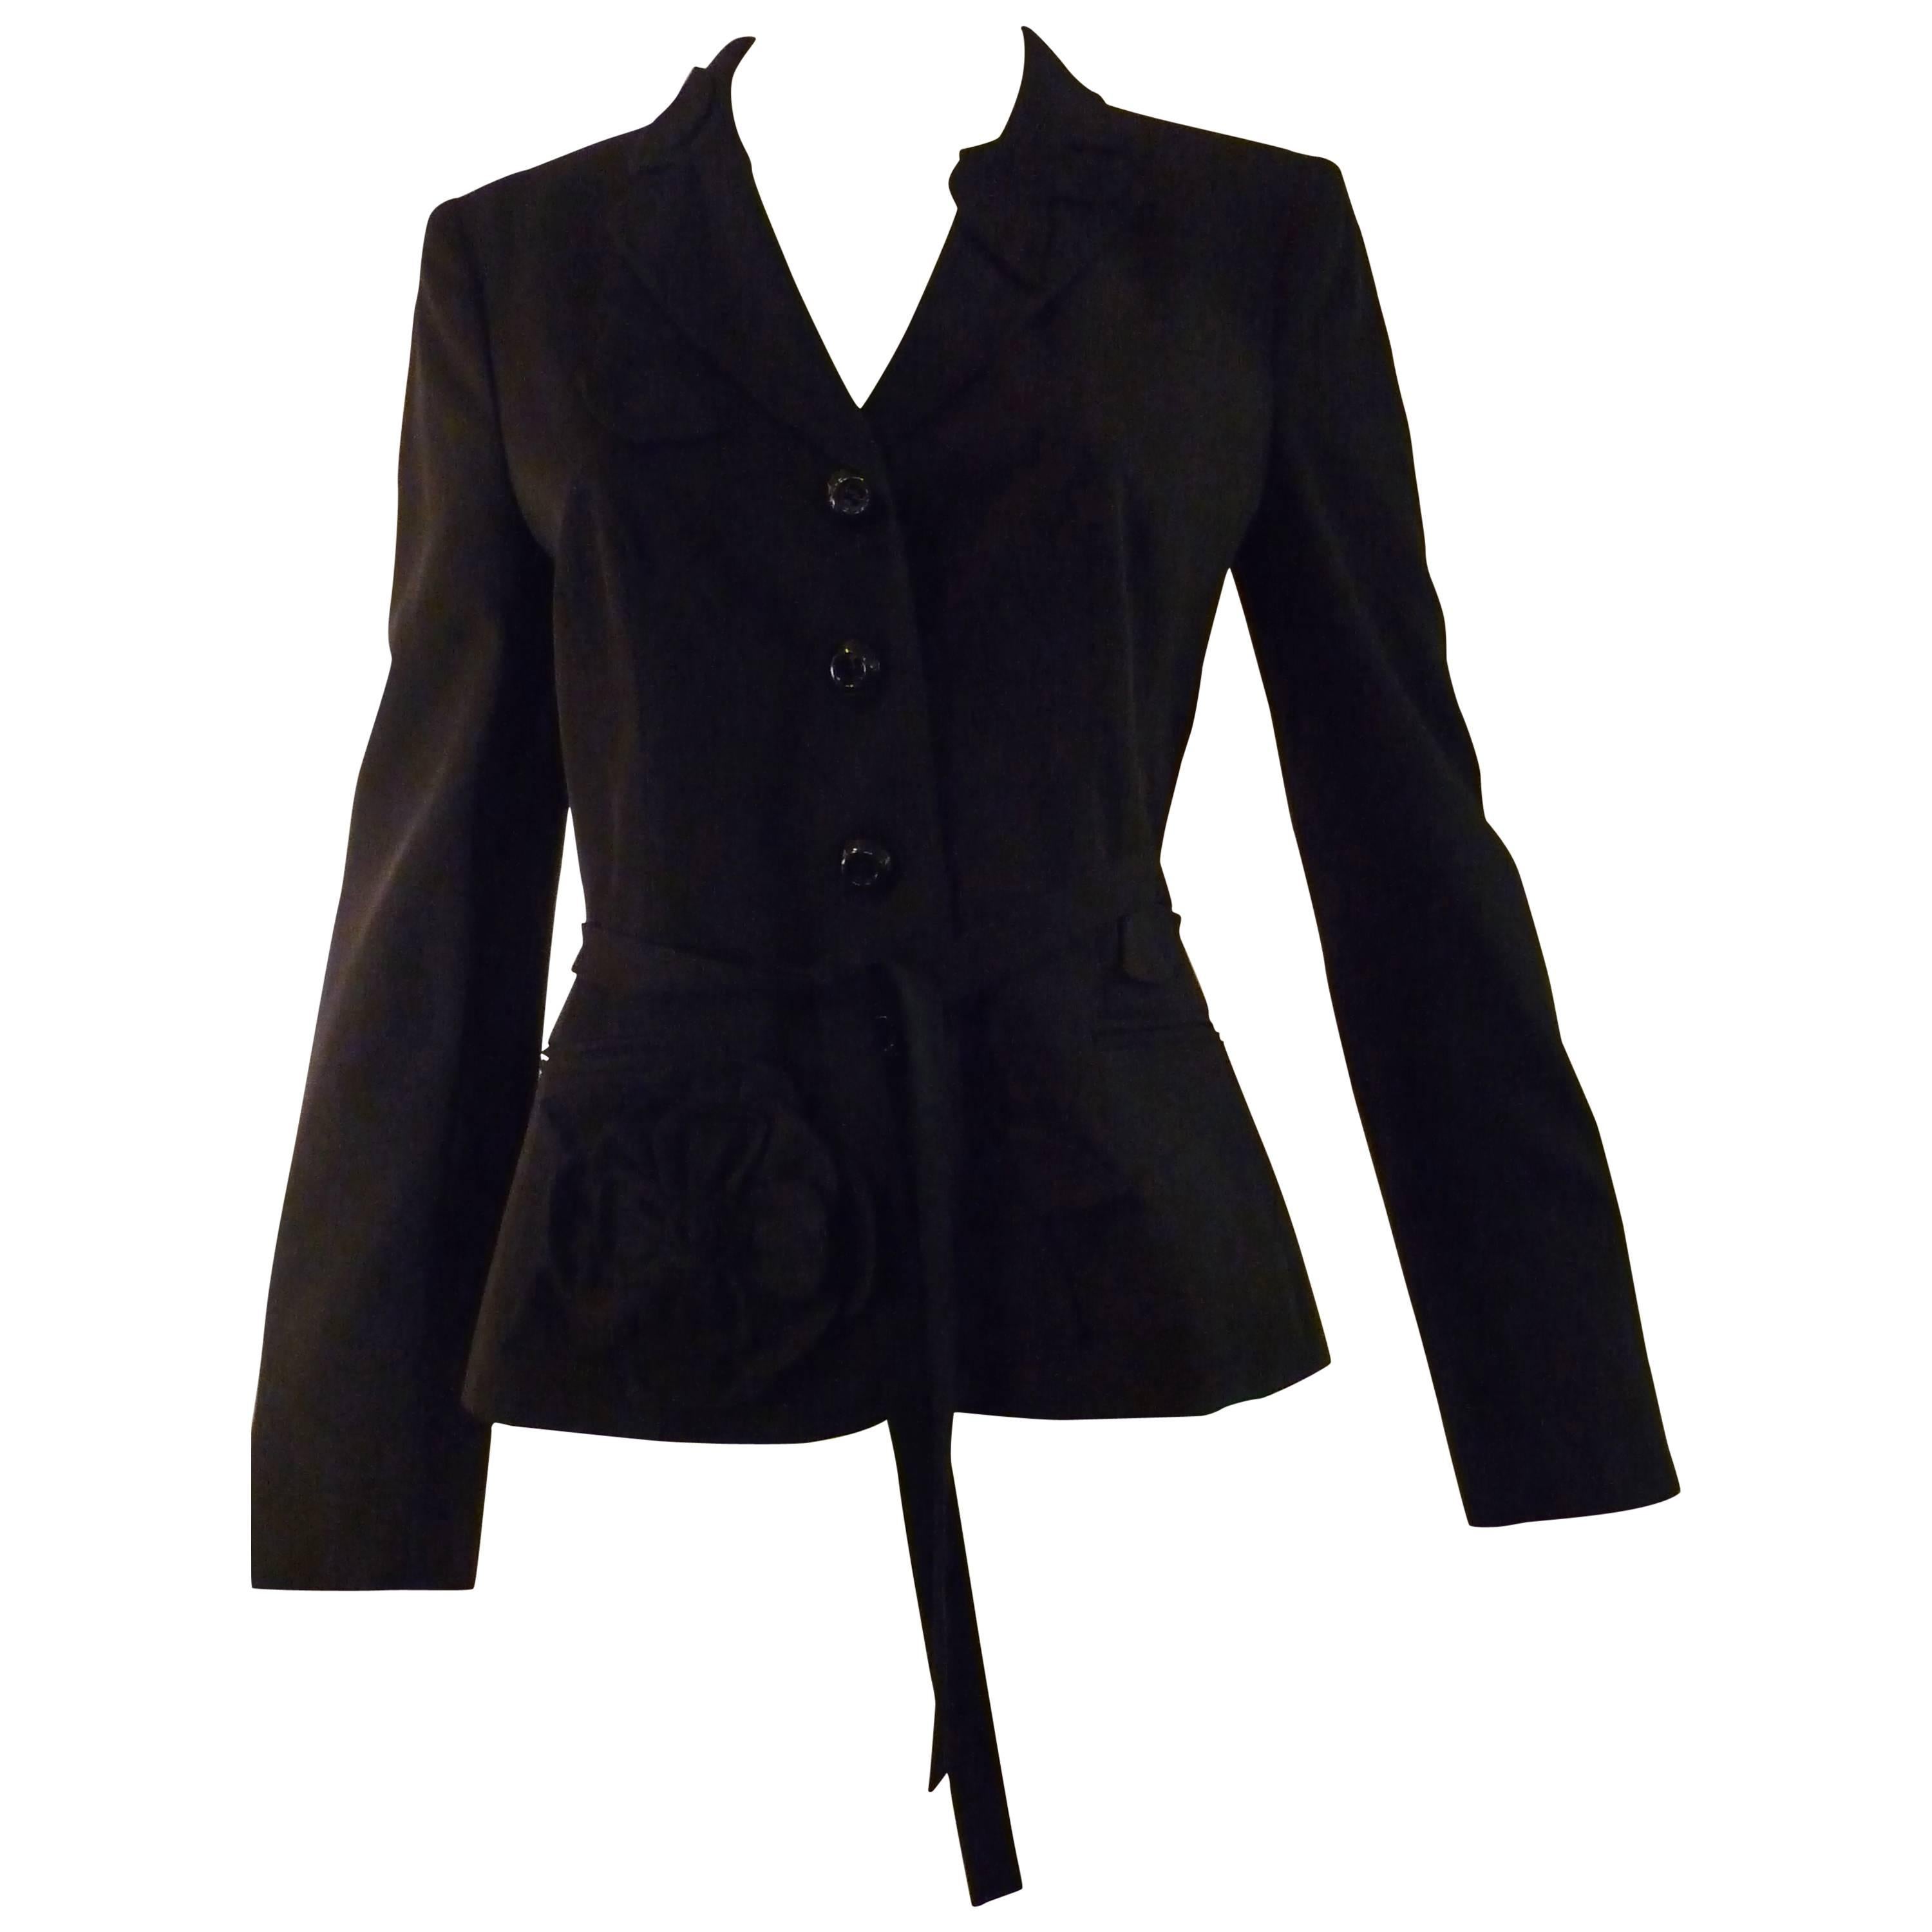 Moschino Cheap and Chic Black Jacket with Leaf and Flower Applique 44 (Itl)